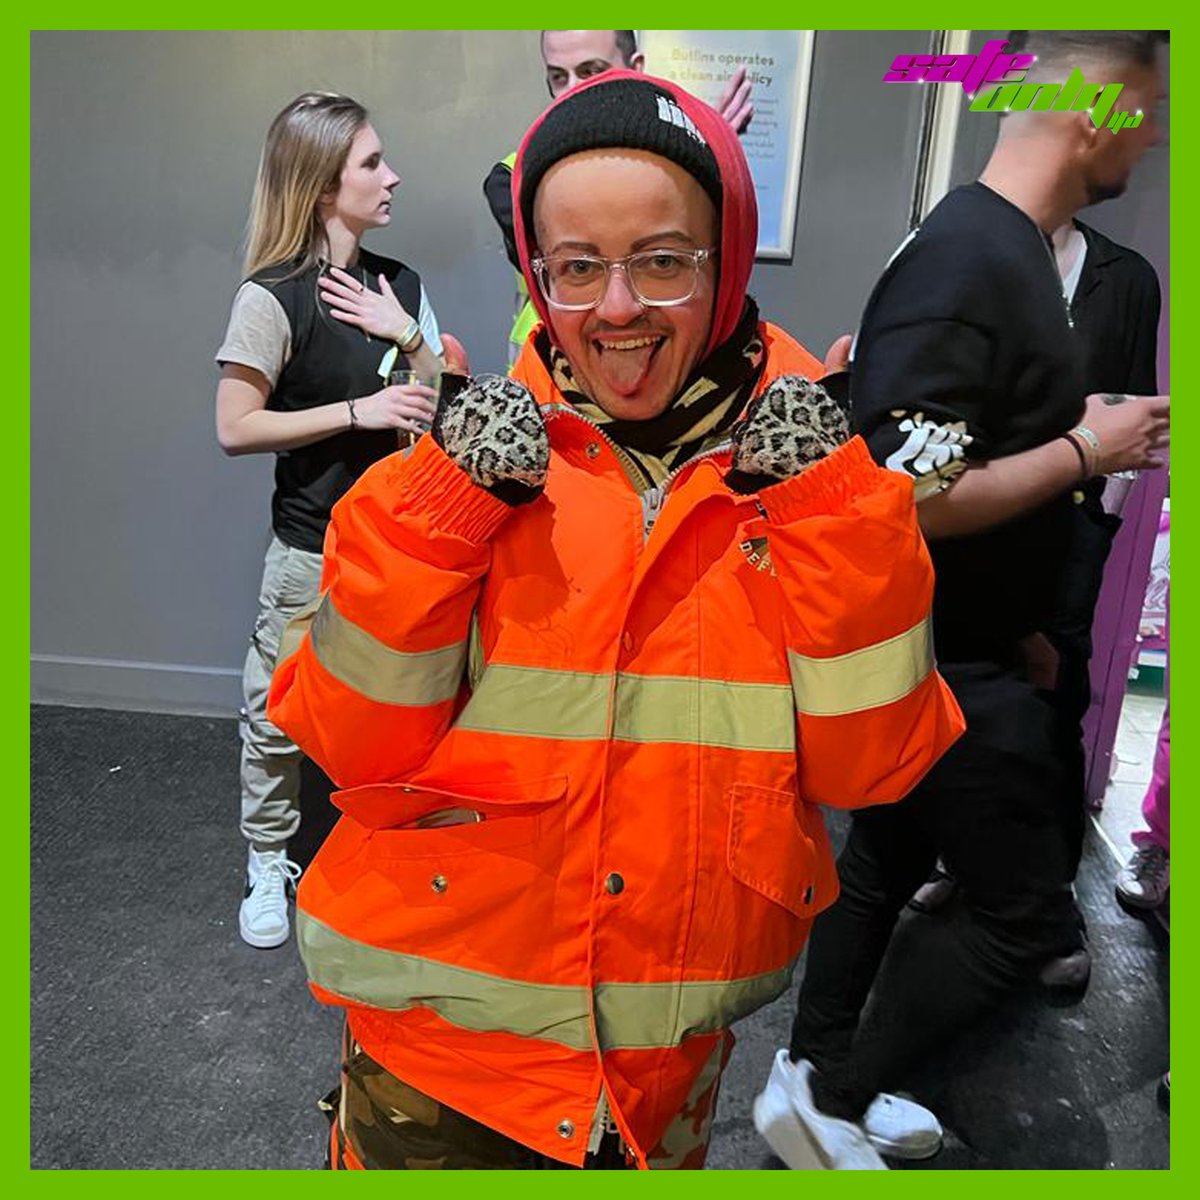 Hoopla, Hoopla, Hoopla. So good that we have no choice but to say, “Get well soon, Dani!” (and NOT in a Mel C way…) #welfare #security @mightyhoopla